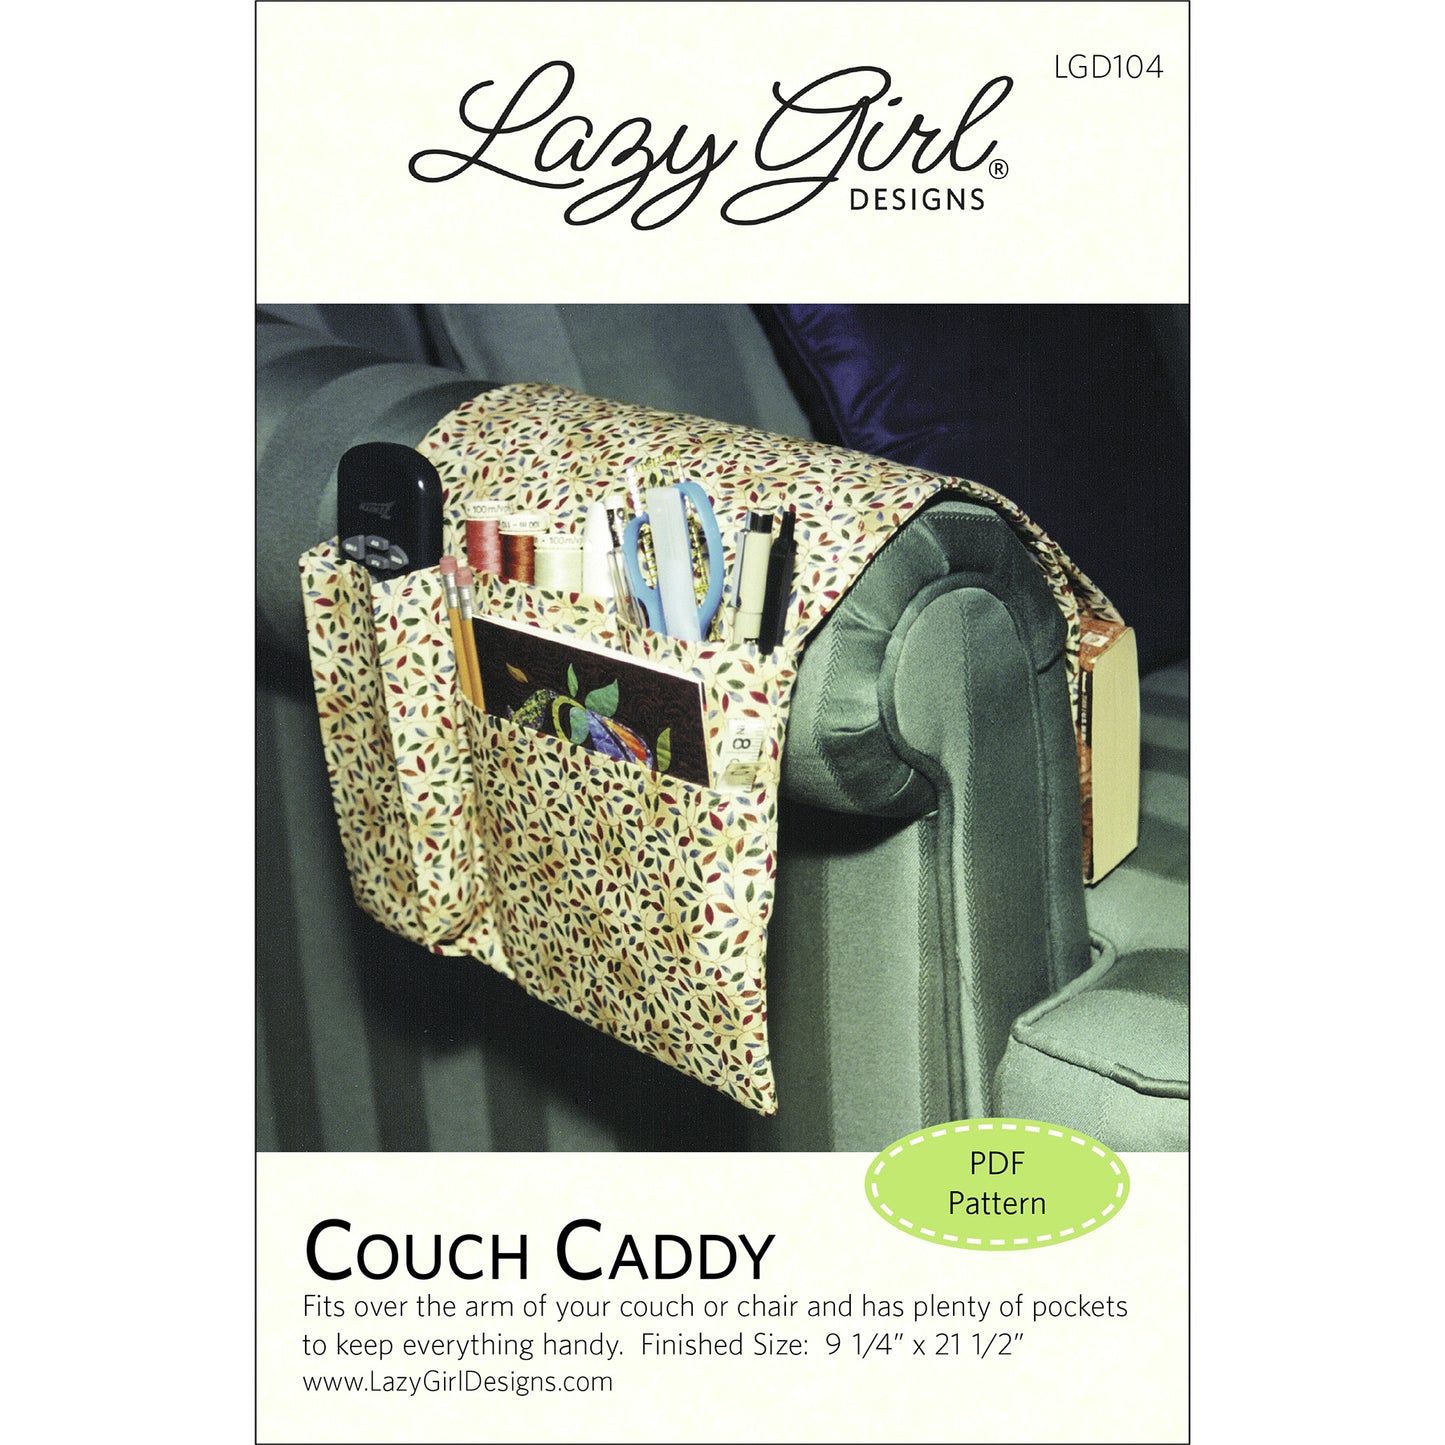 Couch Caddy PDF Pattern